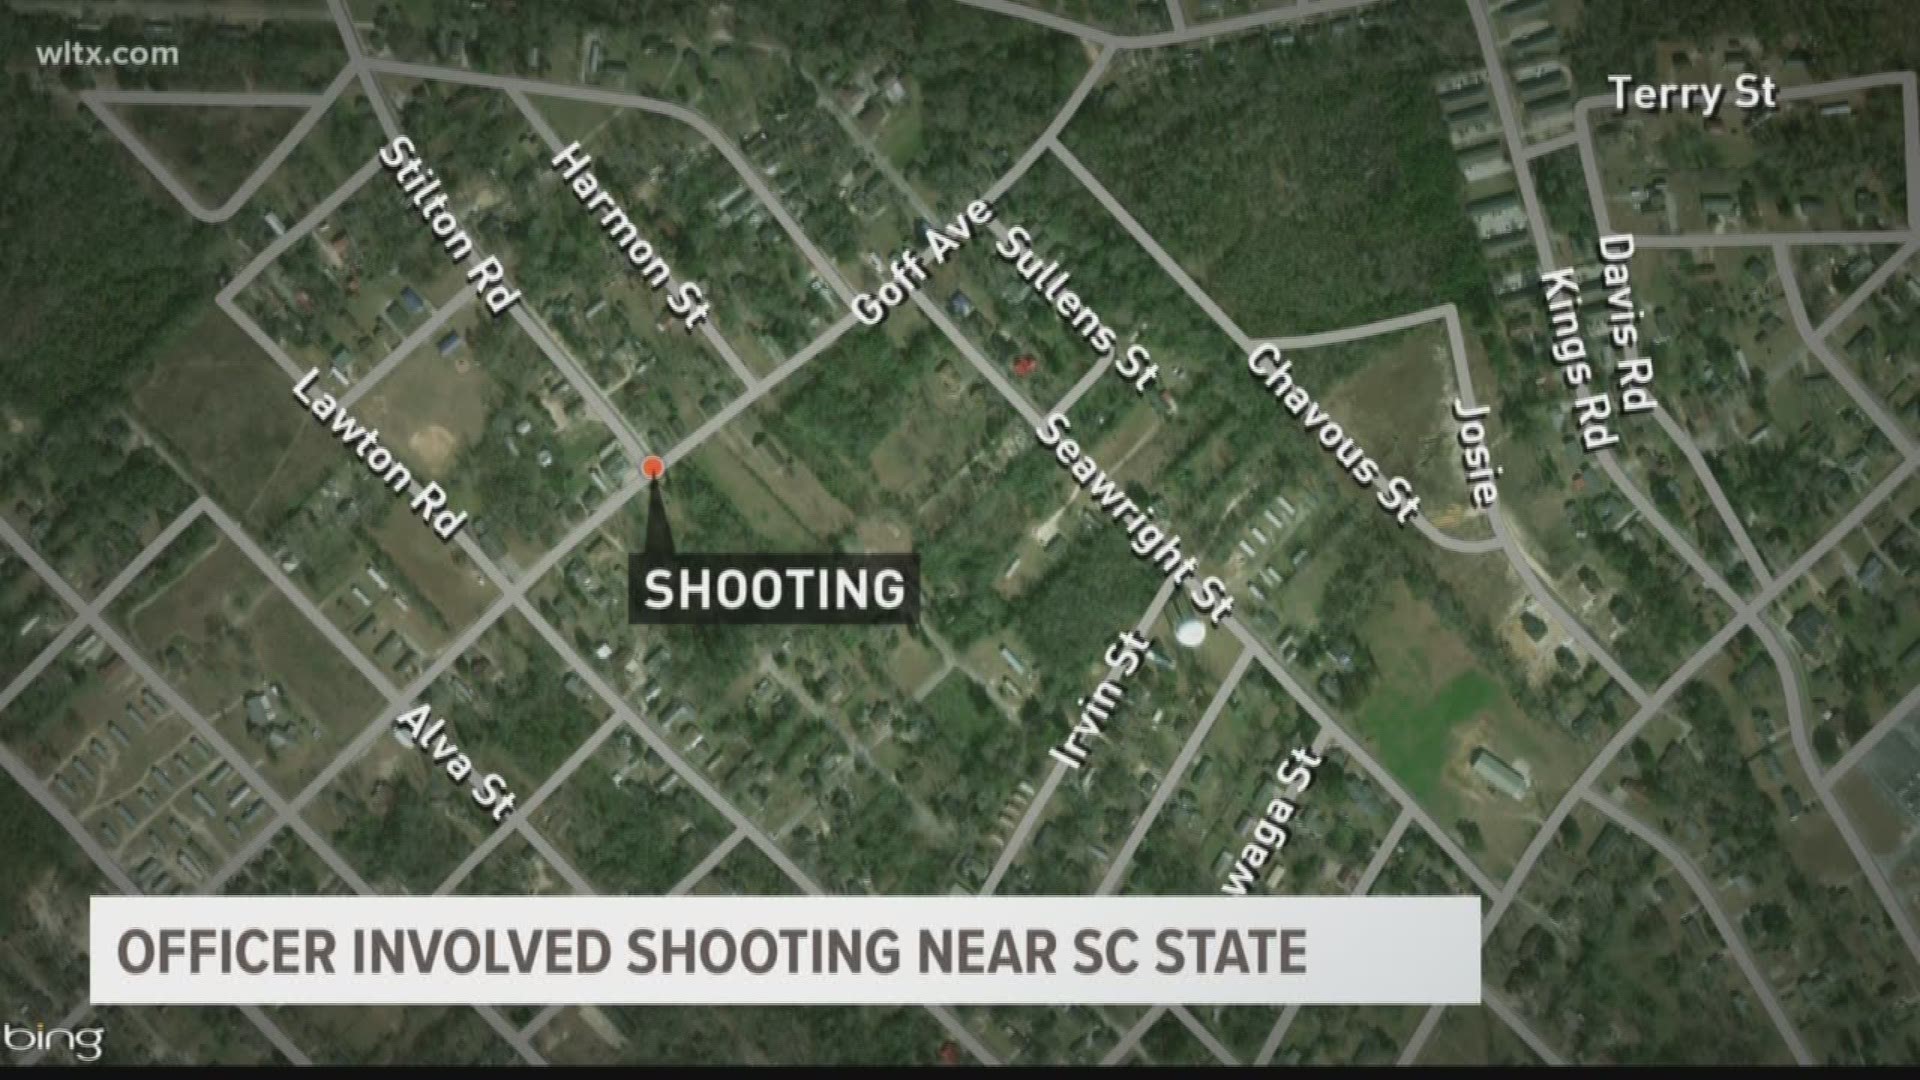 SLED said it is investigating an officer involved shooting that happened Saturday near SC State's campus in Orangeburg.